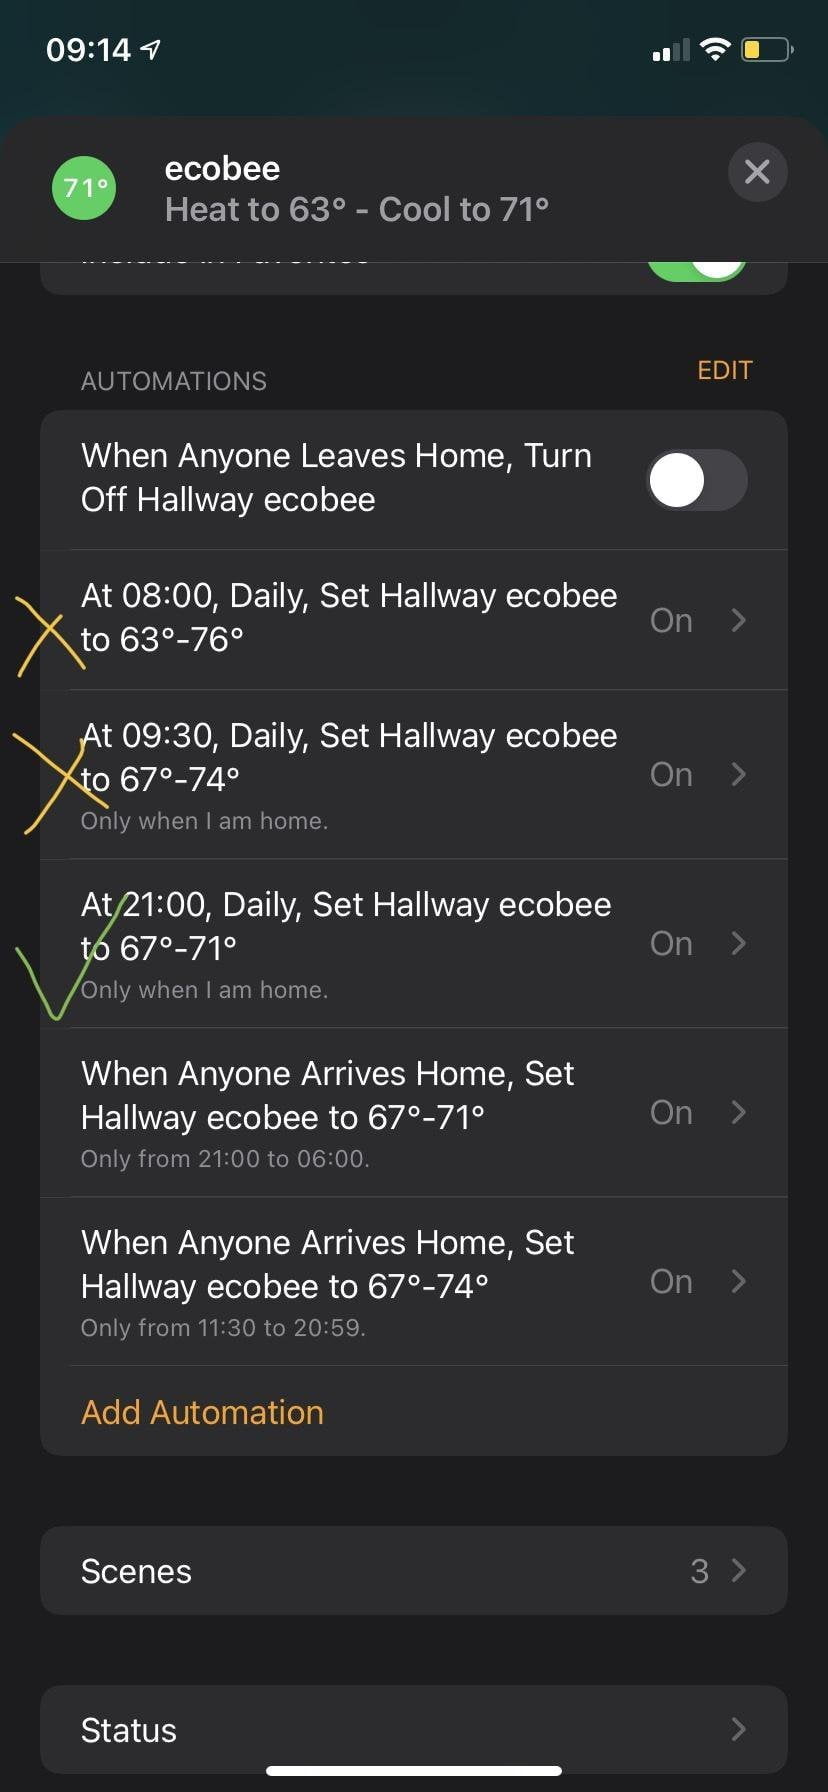 Ecobee Automations helps